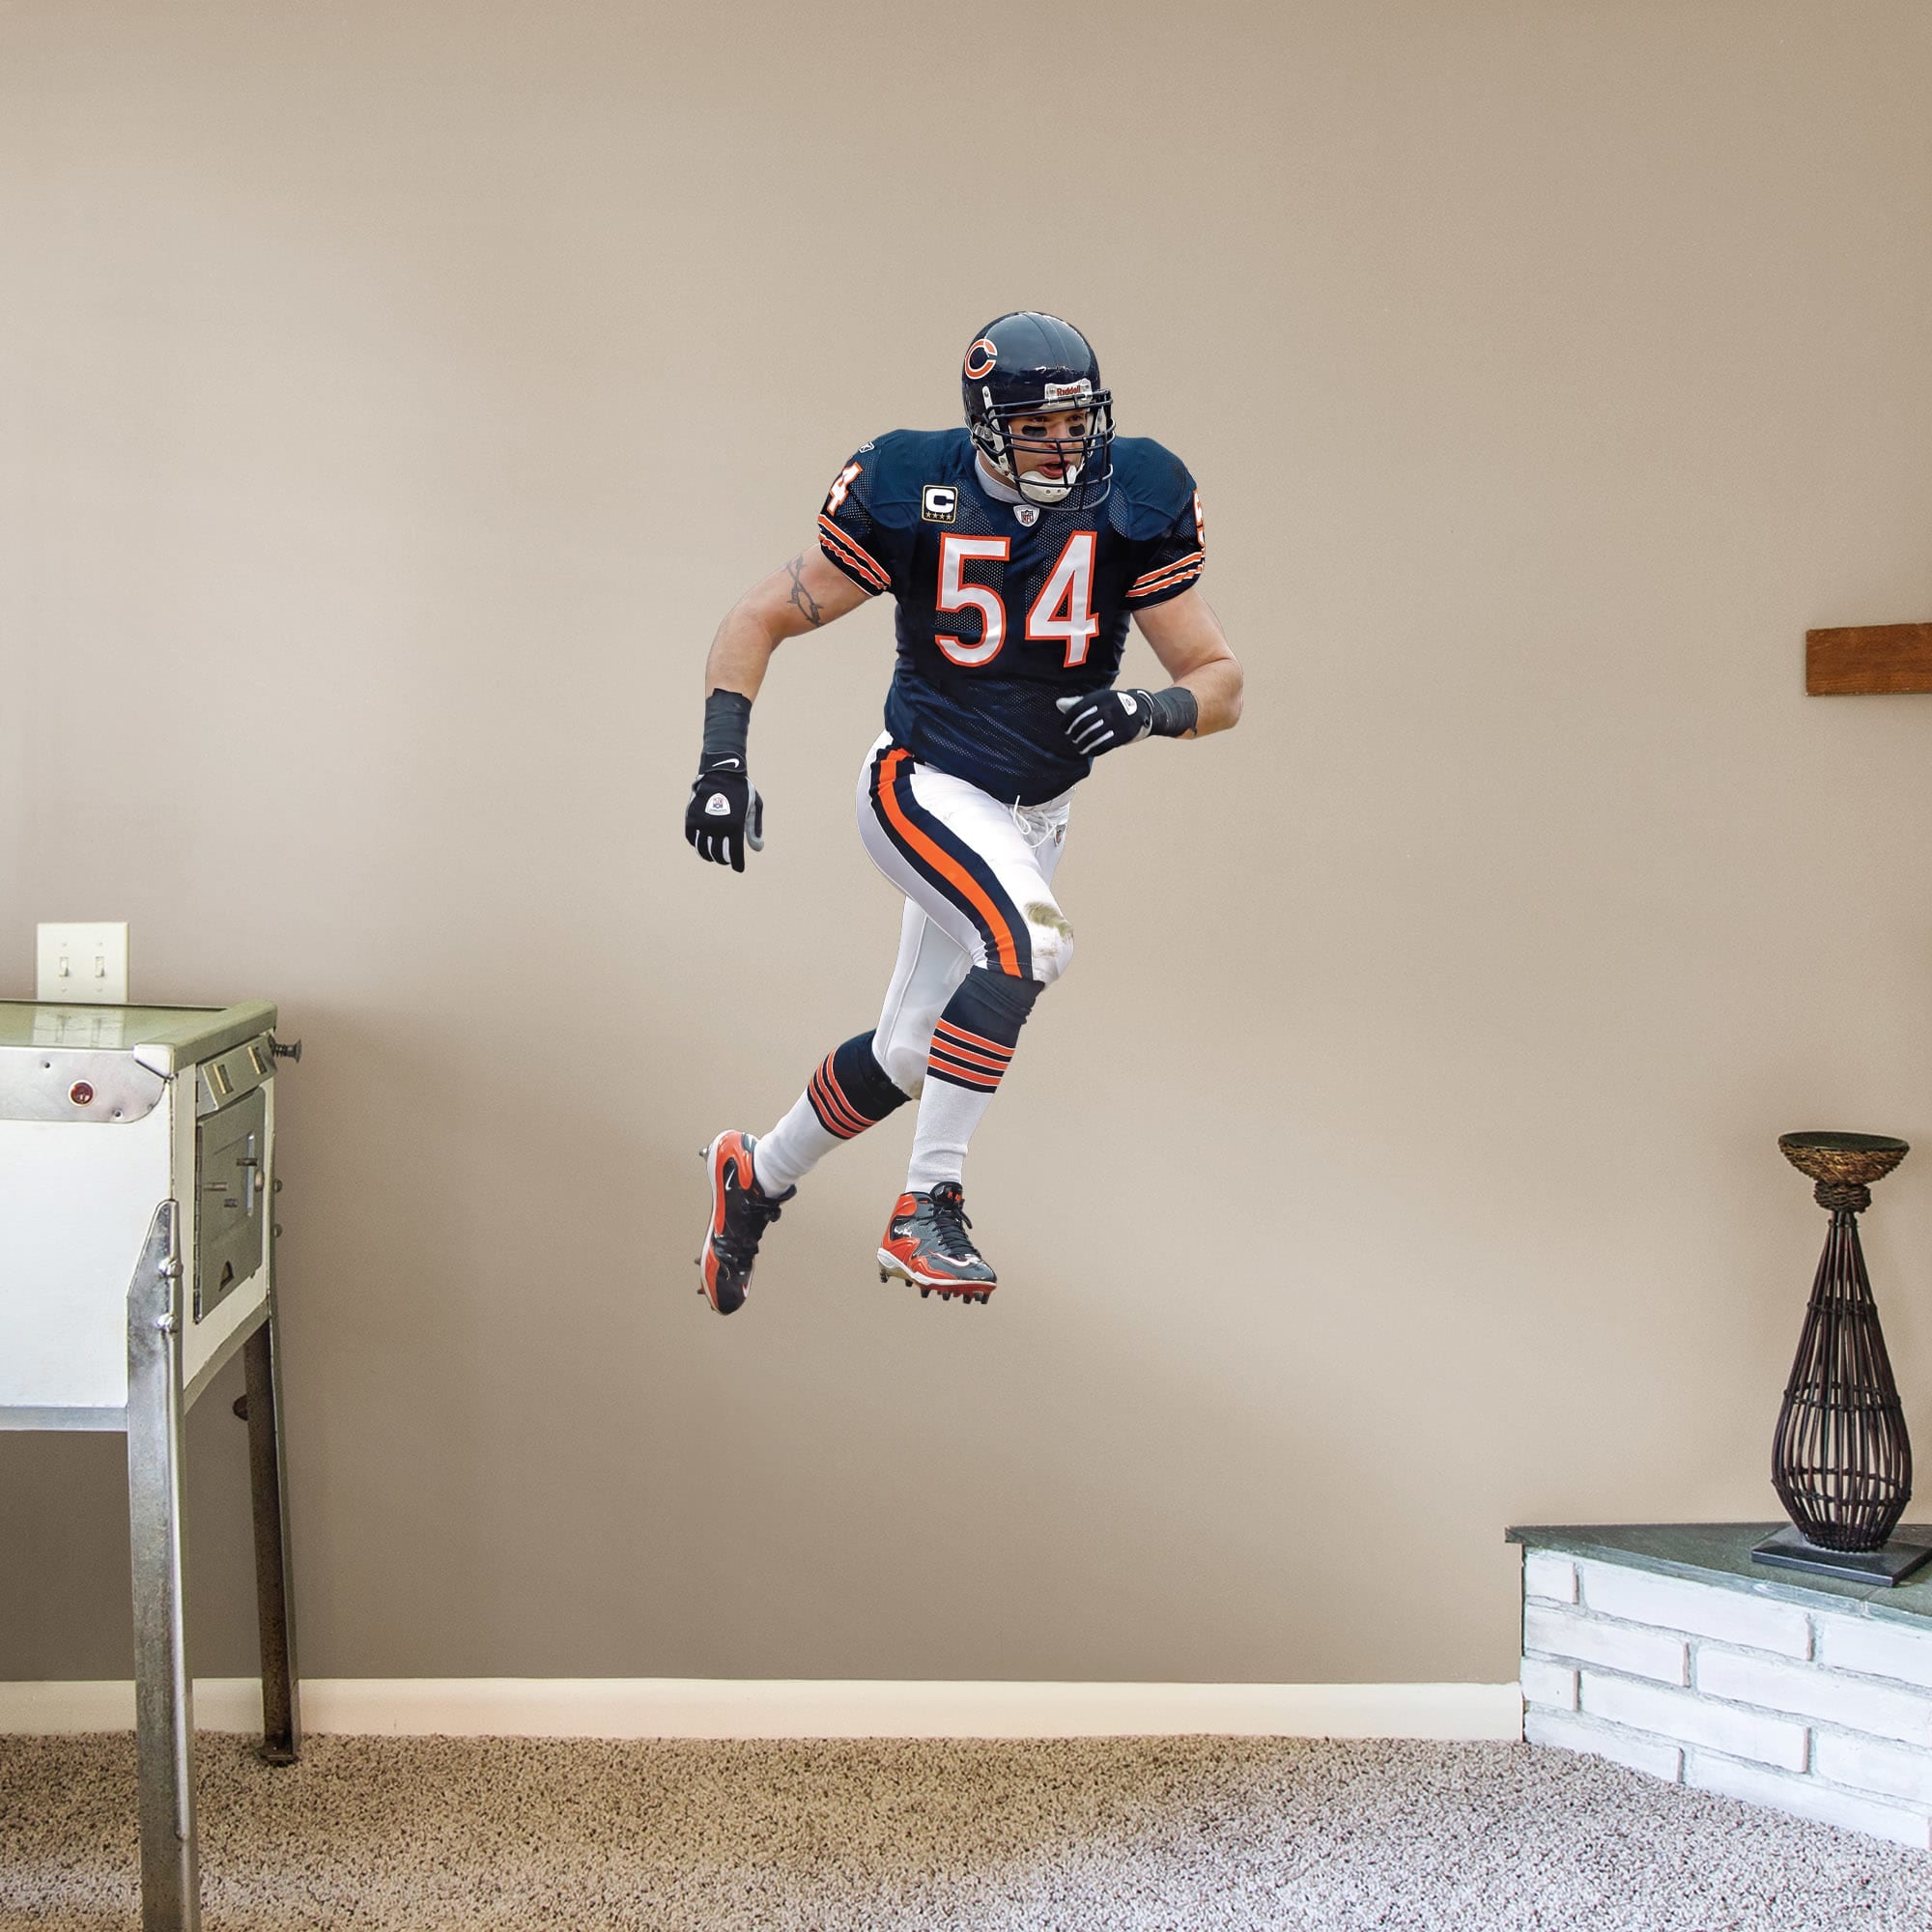 Brian Urlacher for Chicago Bears: Legend - Officially Licensed NFL Removable Wall Decal Giant Athlete + 2 Decals (28"W x 51"H) b